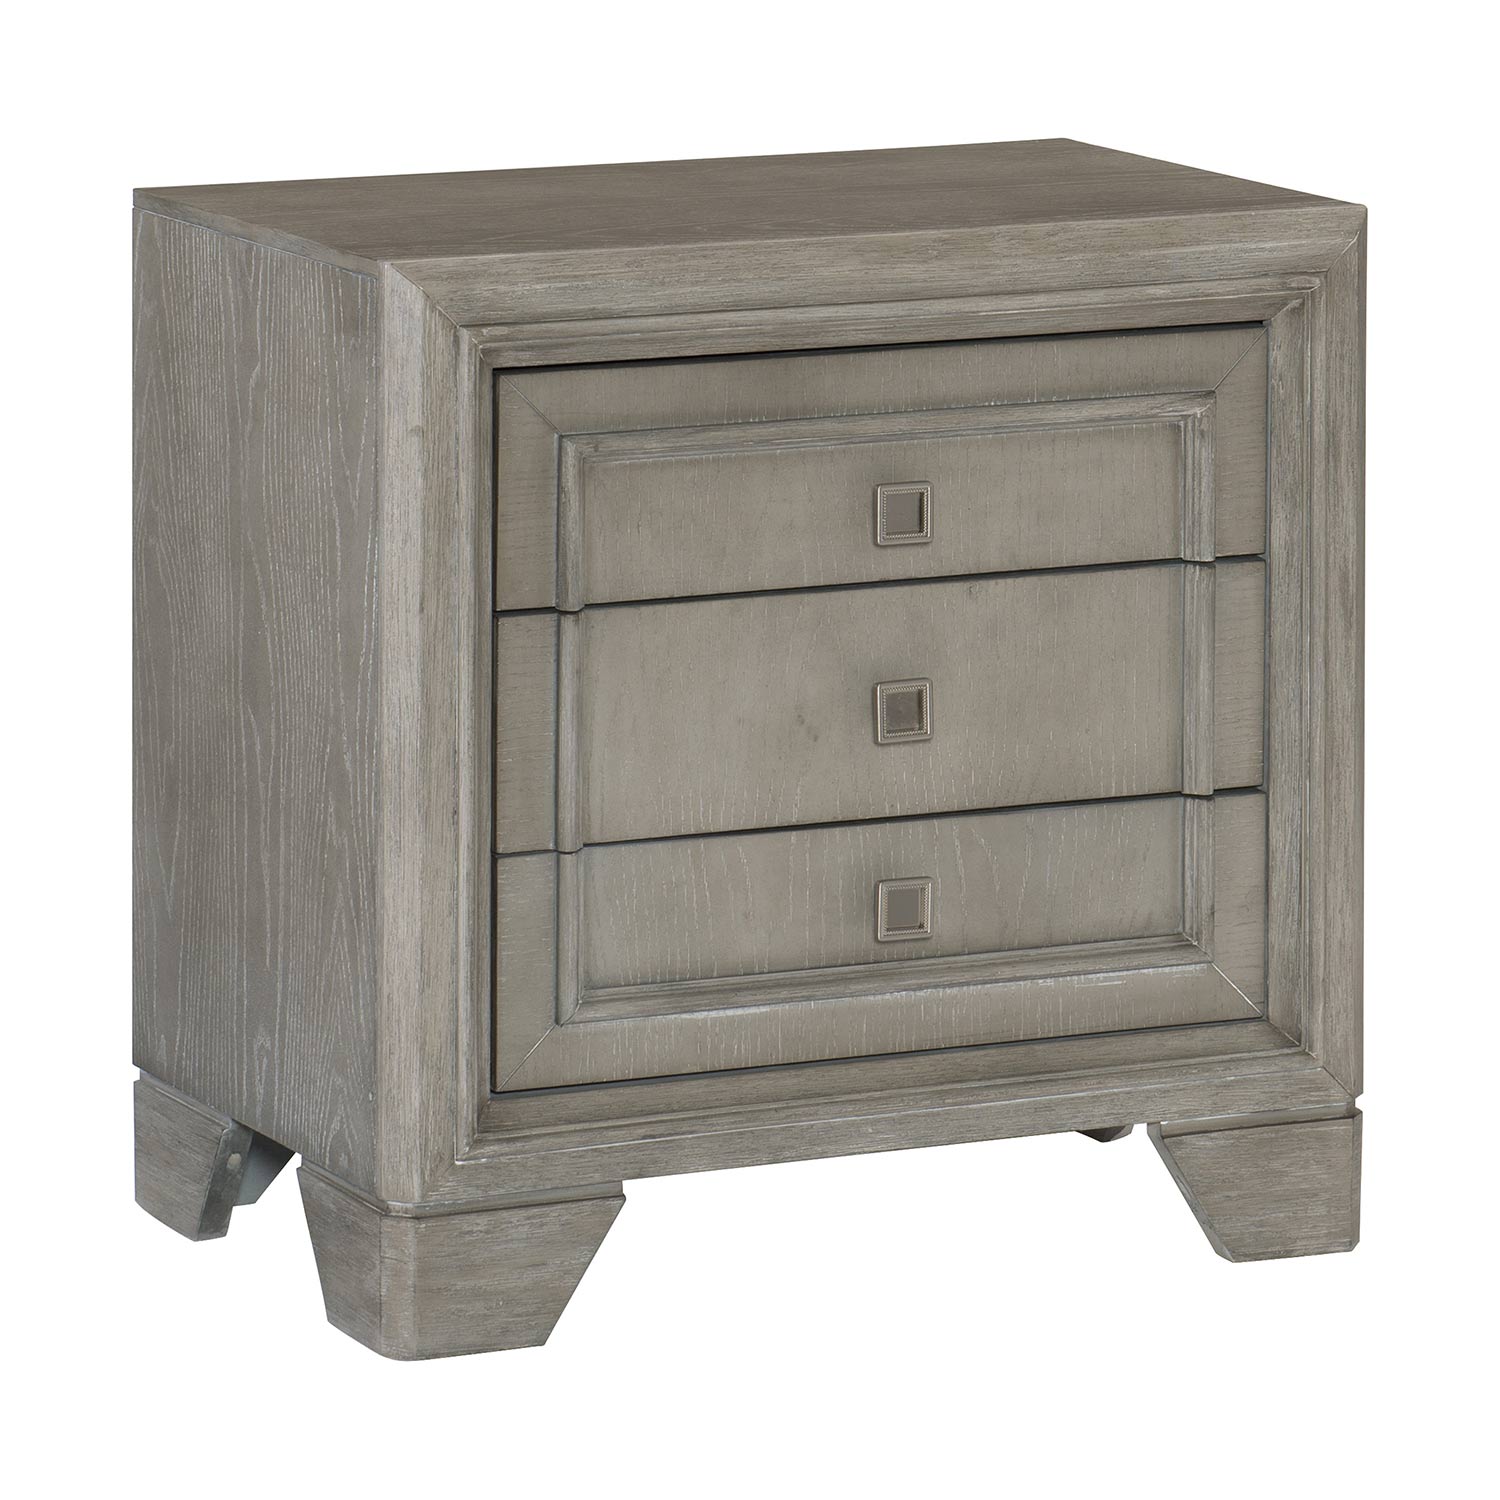 Homelegance Colchester Night Stand - Driftwood Gray